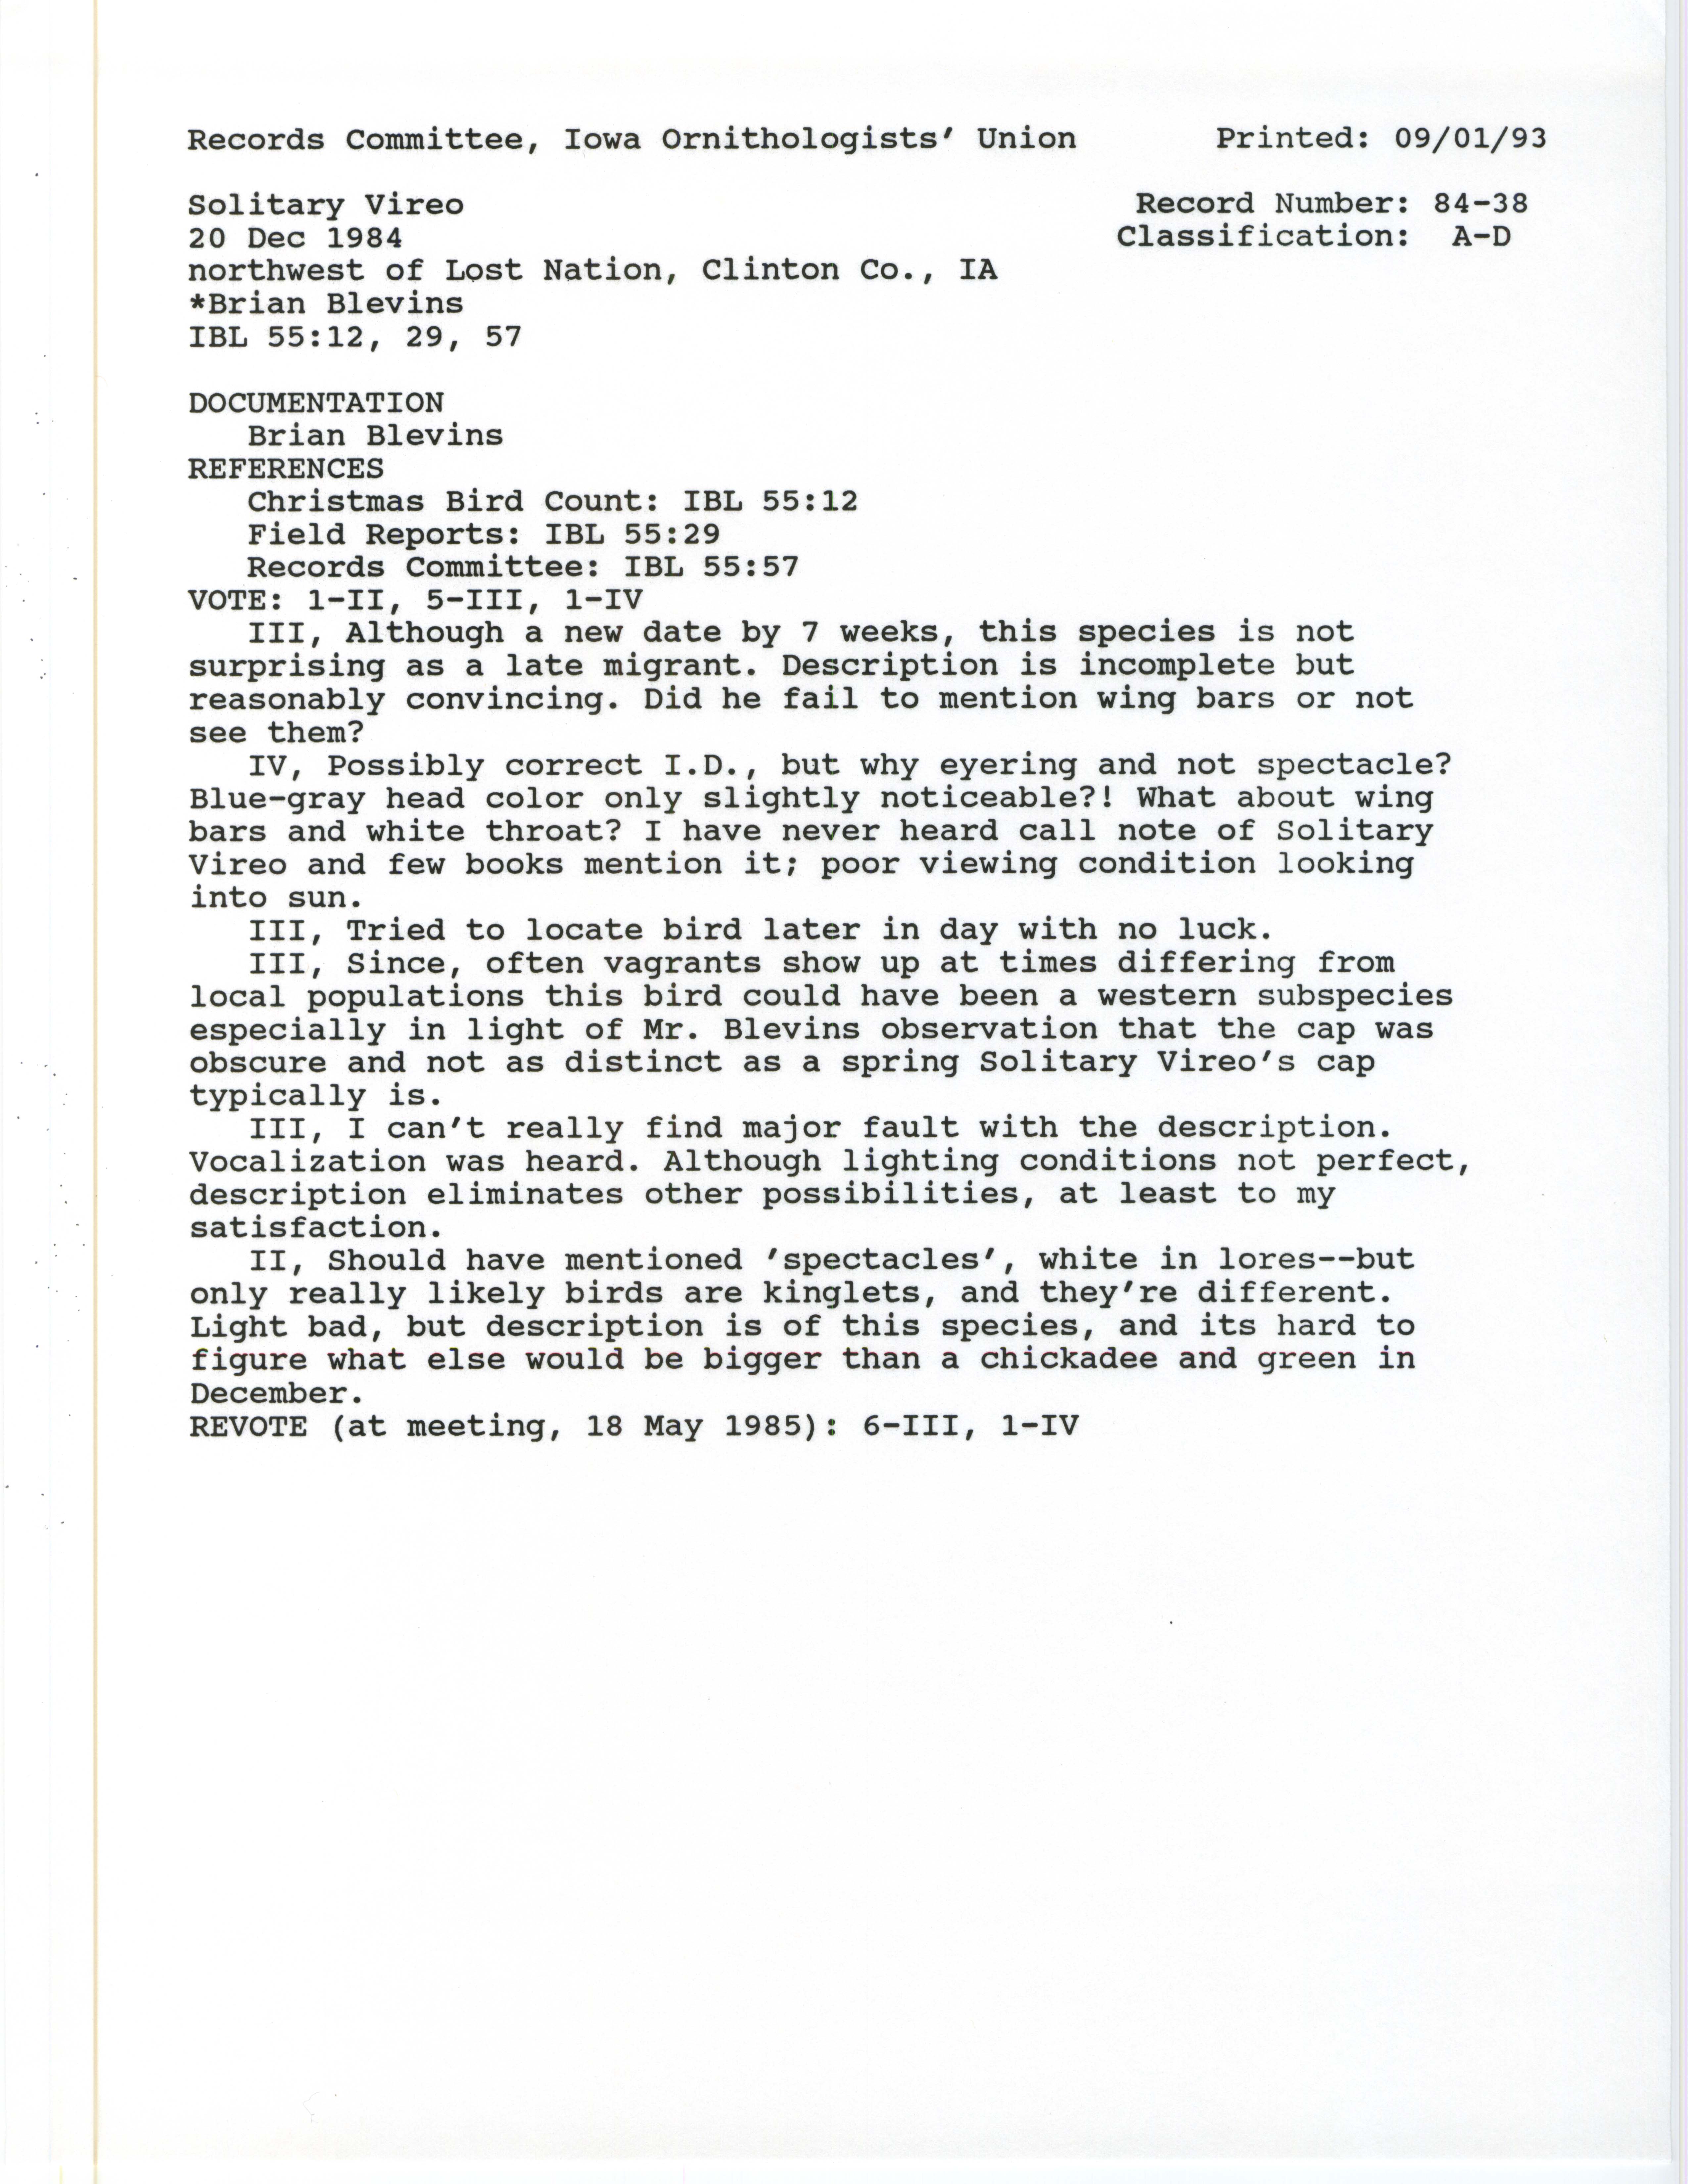 Records Committee review for rare bird sighting for Solitary Vireo northwest of Lost Nation, 1984